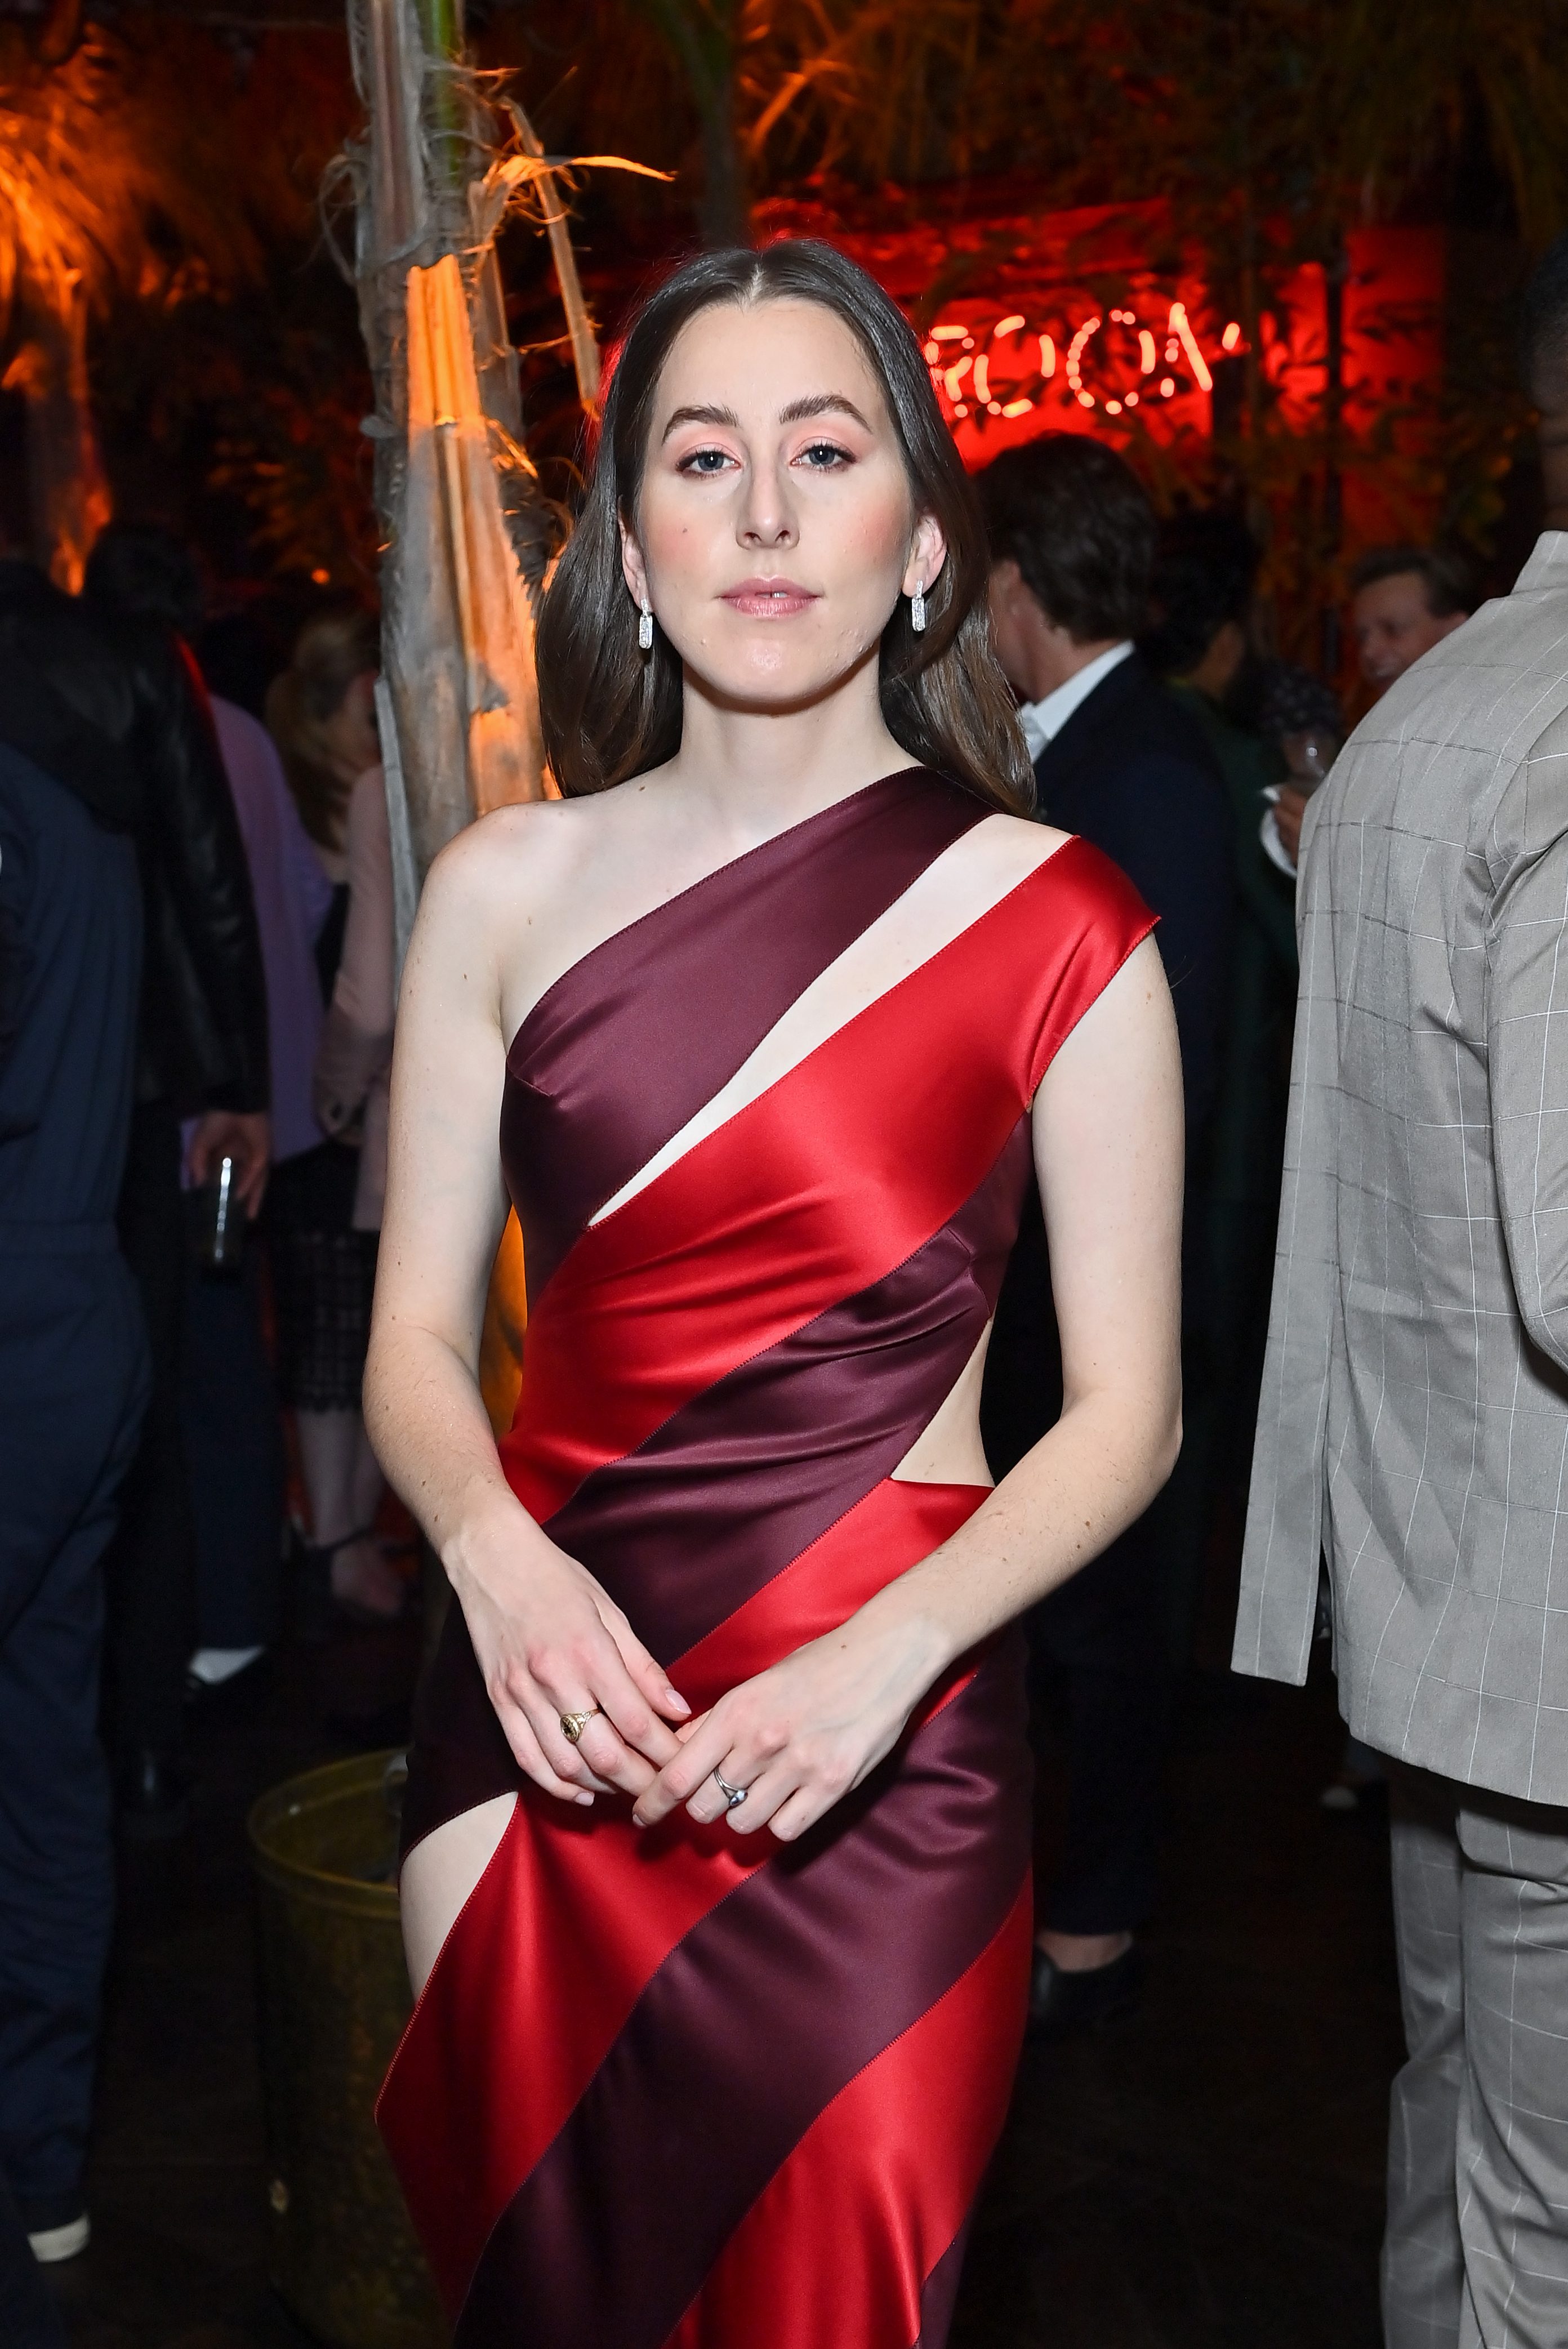 Louis Vuitton Scales Dress worn by Alana Haim on Oscars 2022 Red